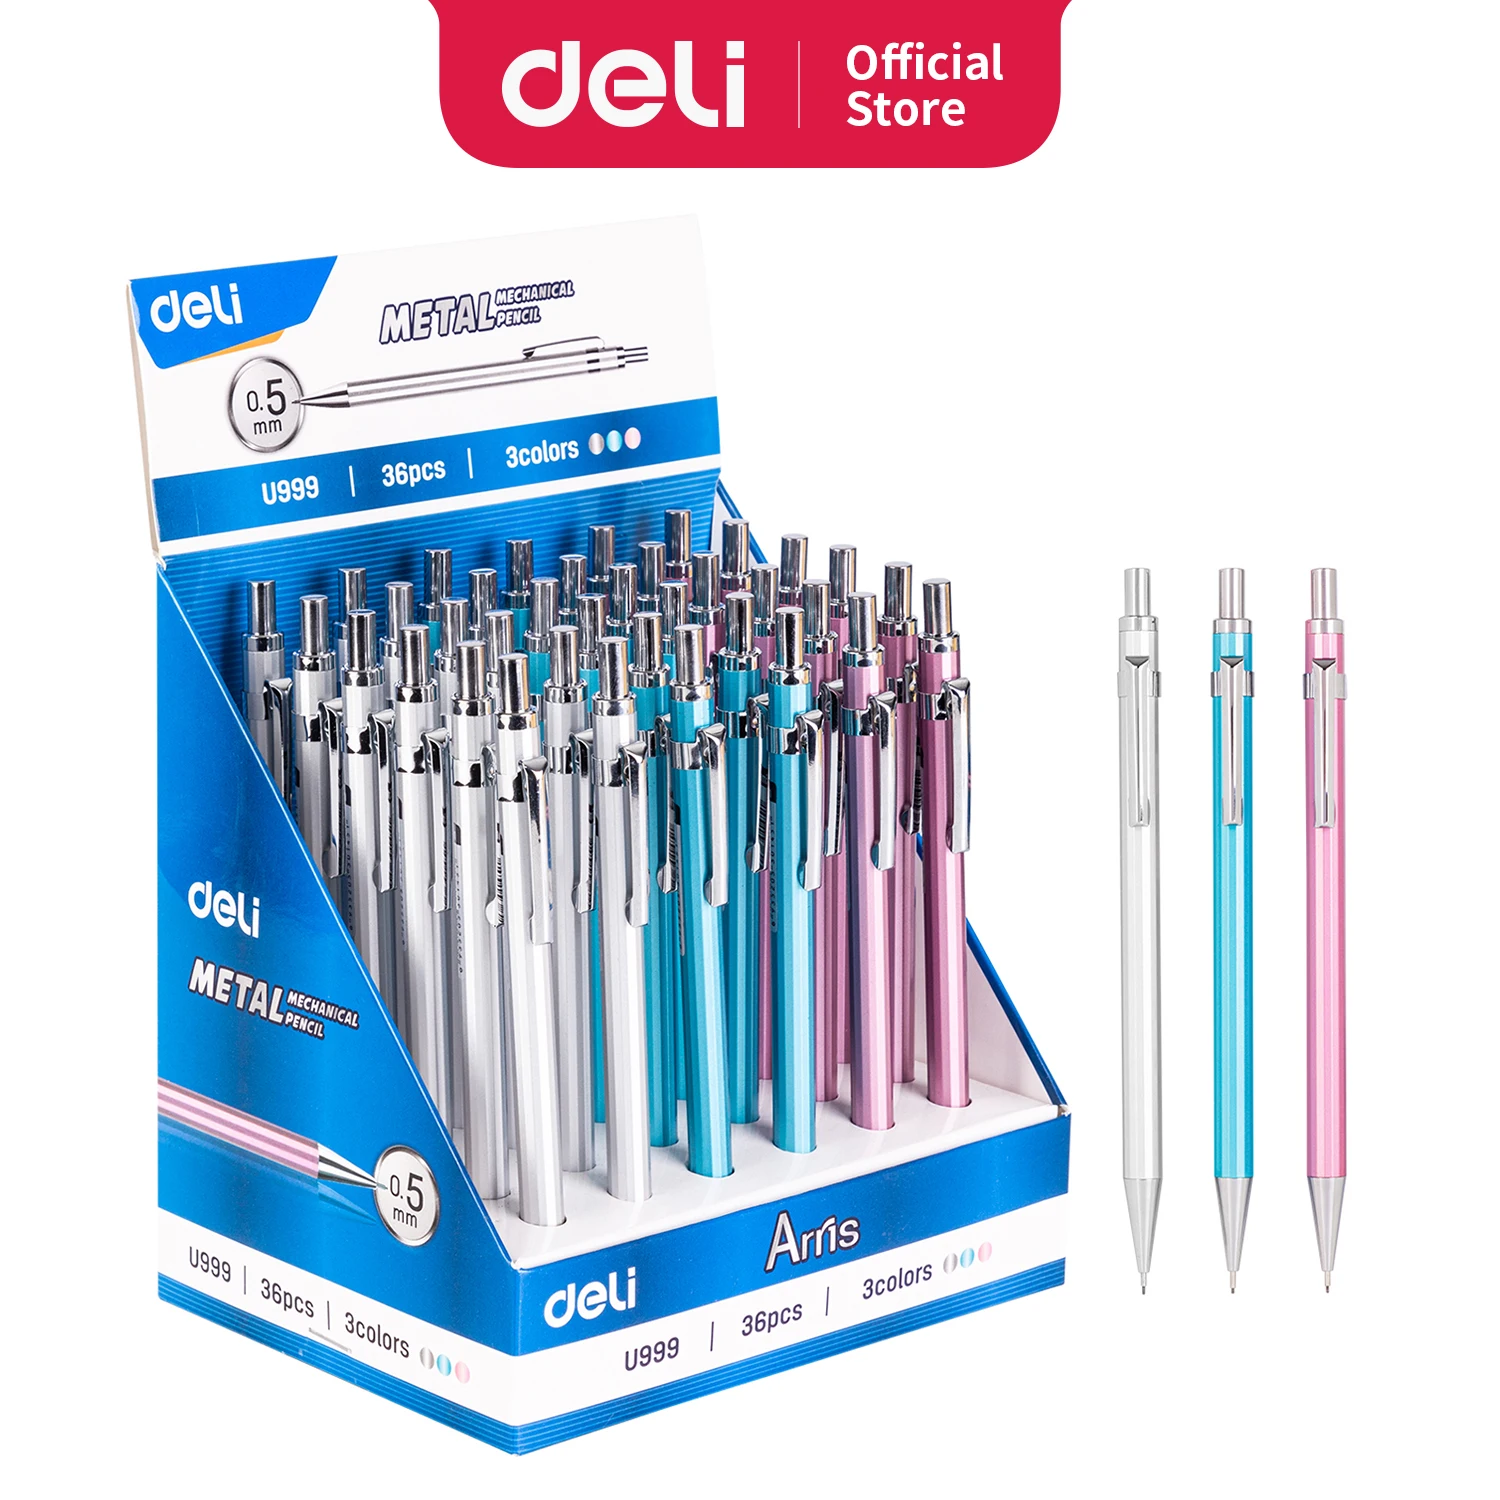 Deli Metal Mechanical Pencil 0.5mm 0.7mm with Lead Retractable Black Lead Pencils Stationery School Supplies Art Sketch Writing deli high precision outside micrometer 0 25mm 0 01mm mechanical metric micrometer micrometer gauge metal caliper micrometer